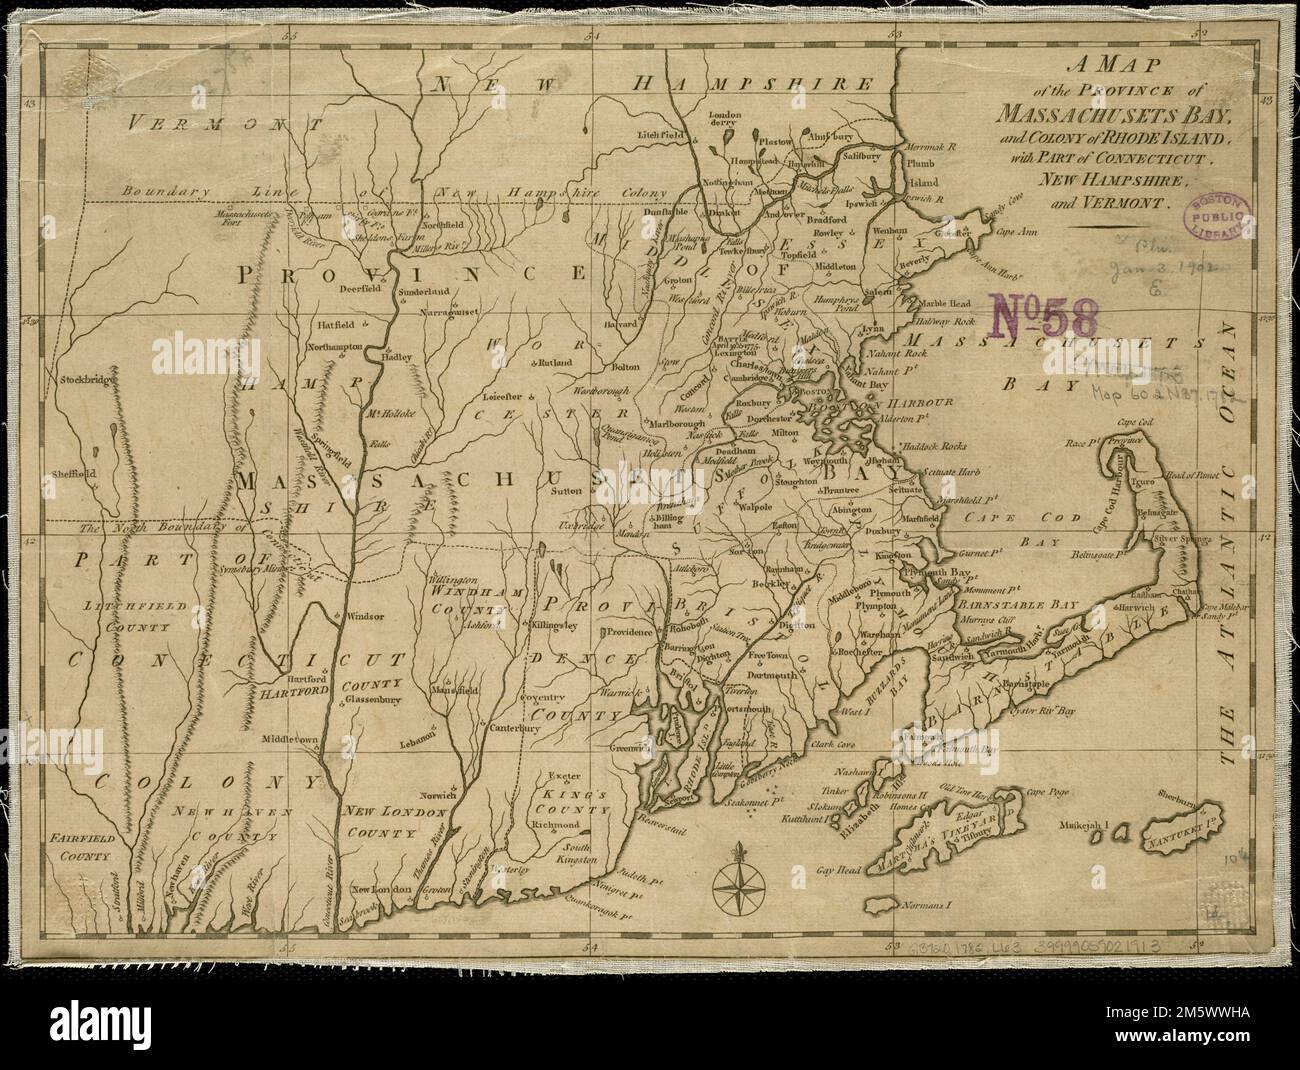 A map of the province of Massachusets Bay and colony of Rhode Island, with part of Connecticut, New Hampshire, and Vermont. Prime meridian:Ferro. Relief shown pictorially. 'Published as the act directs, 15th of April, 1782.'.. Map of the province of Massachusetts Bay. Map of the province of Massachusetts Bay, Massachusetts Rhode Island Connecticut Stock Photo